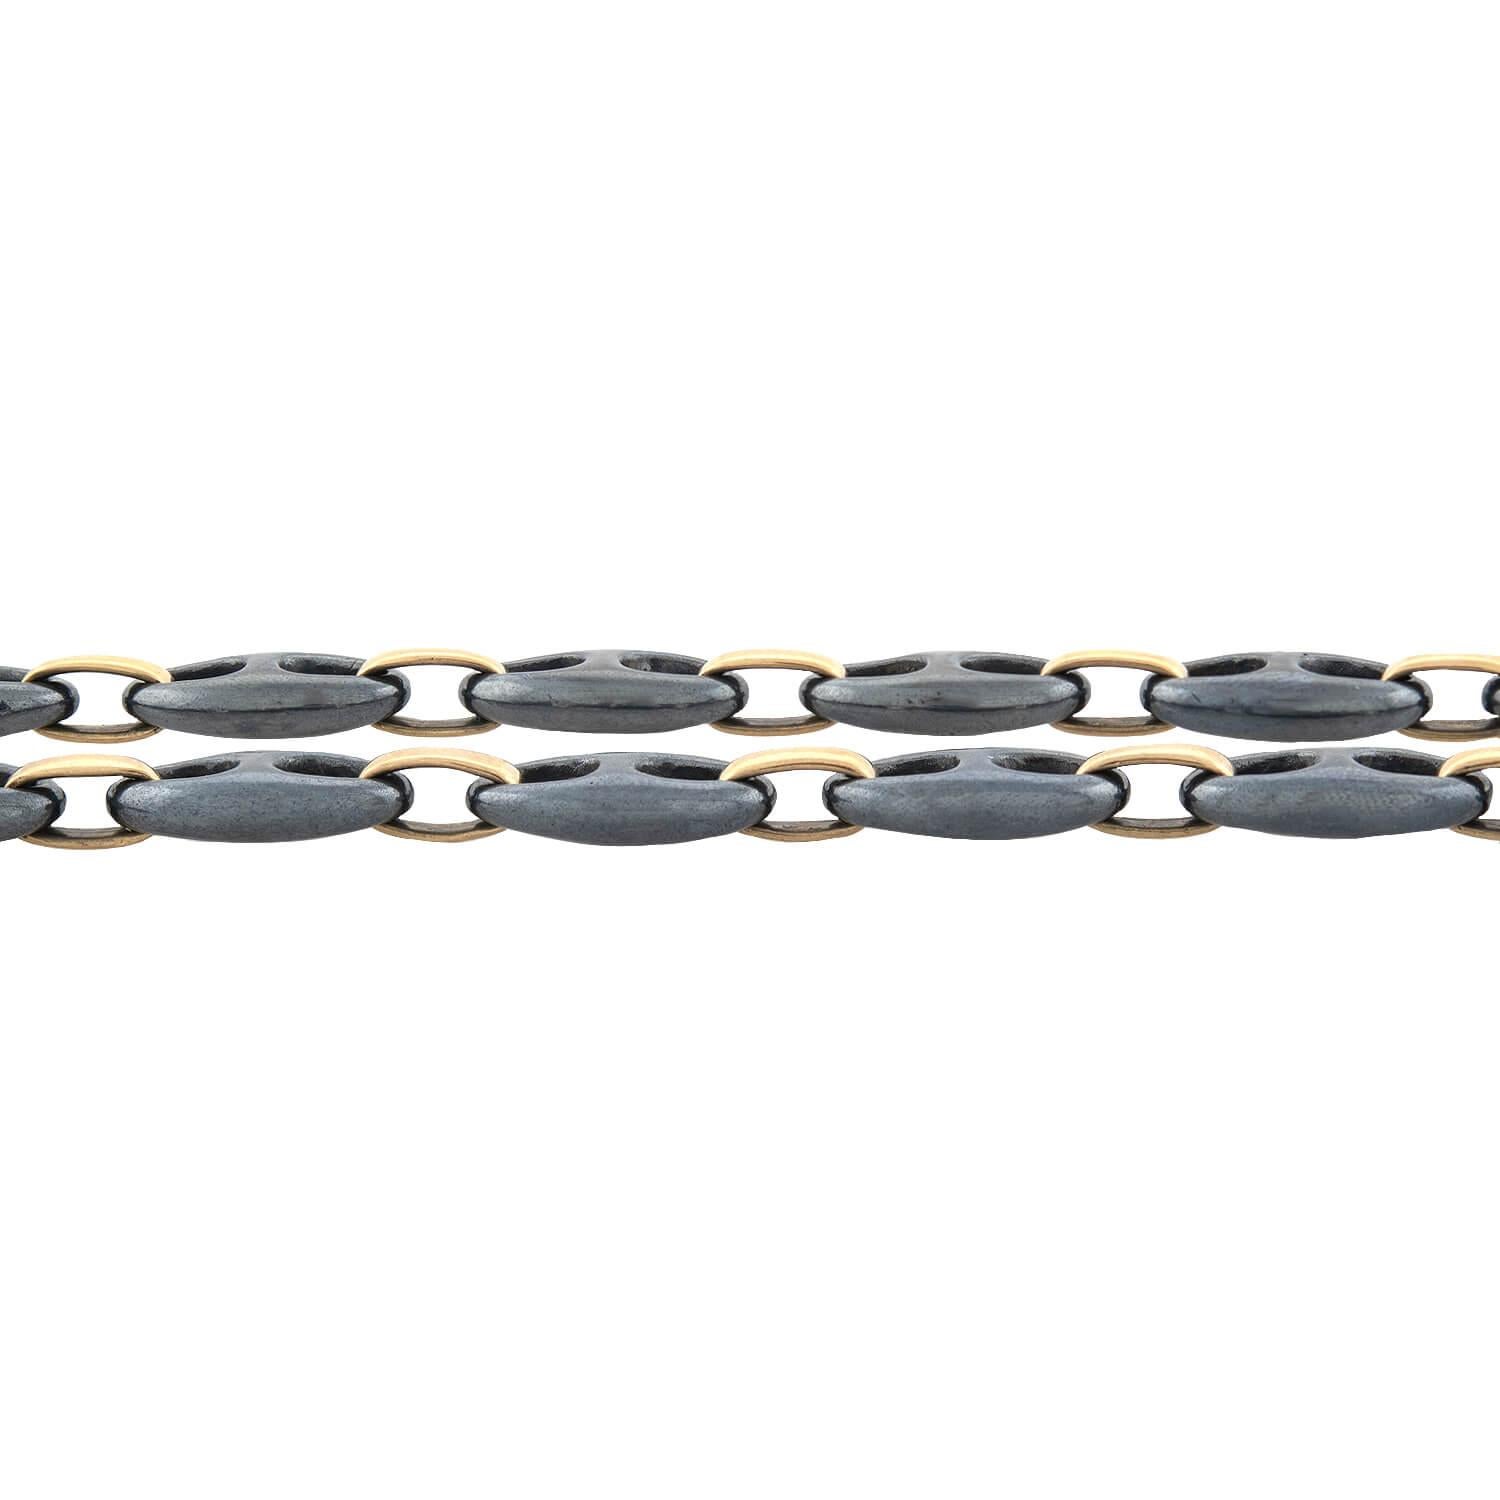 An exceptional necklace from famed maker Tiffany & Co.! Connected by 18kt yellow gold oval-shaped links, this necklace displays hand-carved hematite mariner links. The polished hematite exhibits a luxurious metallic black hue that looks gorgeous